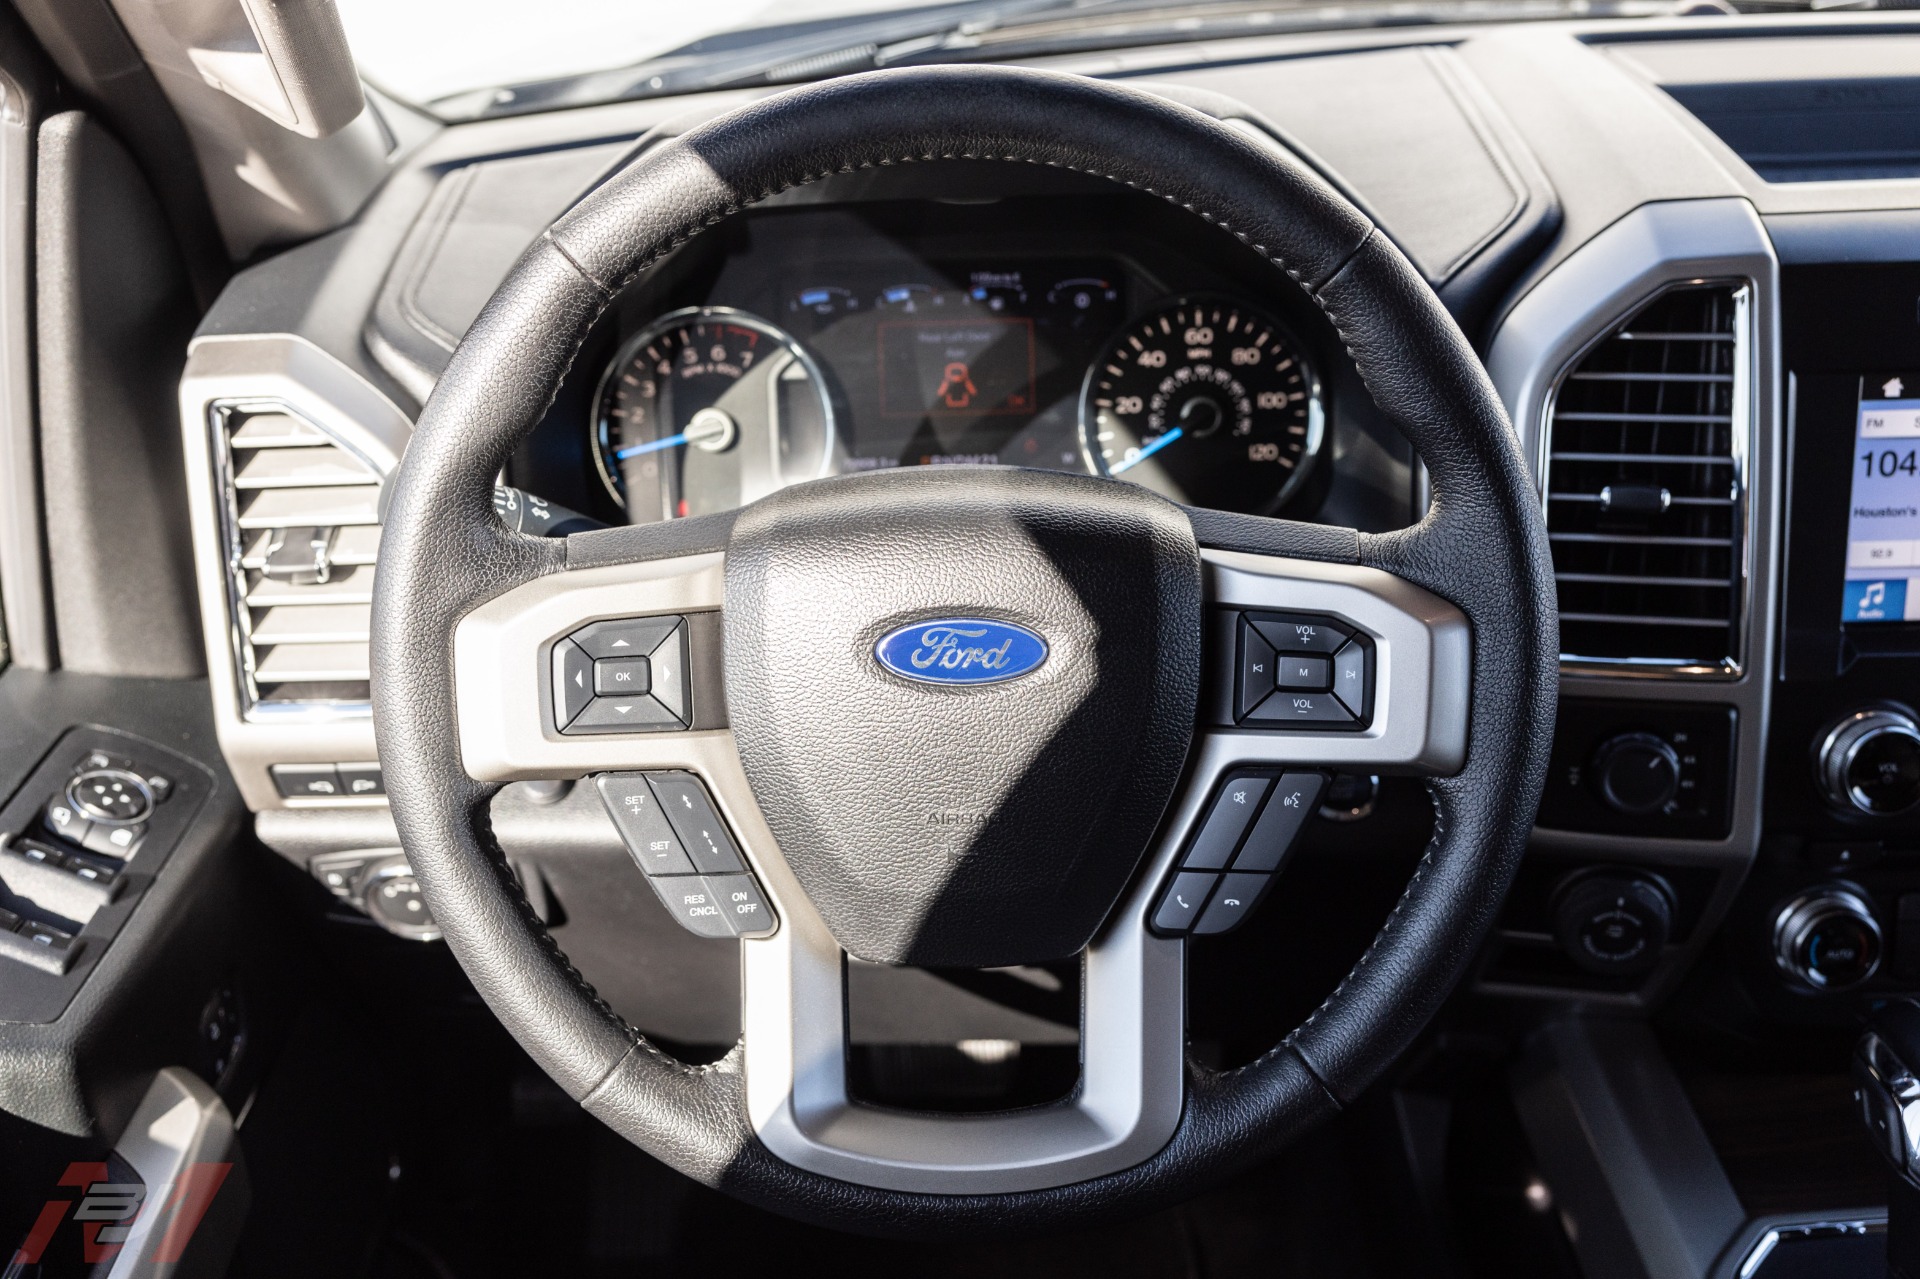 Used-2016-Ford-F-150-Shelby-Supercharged-700HP